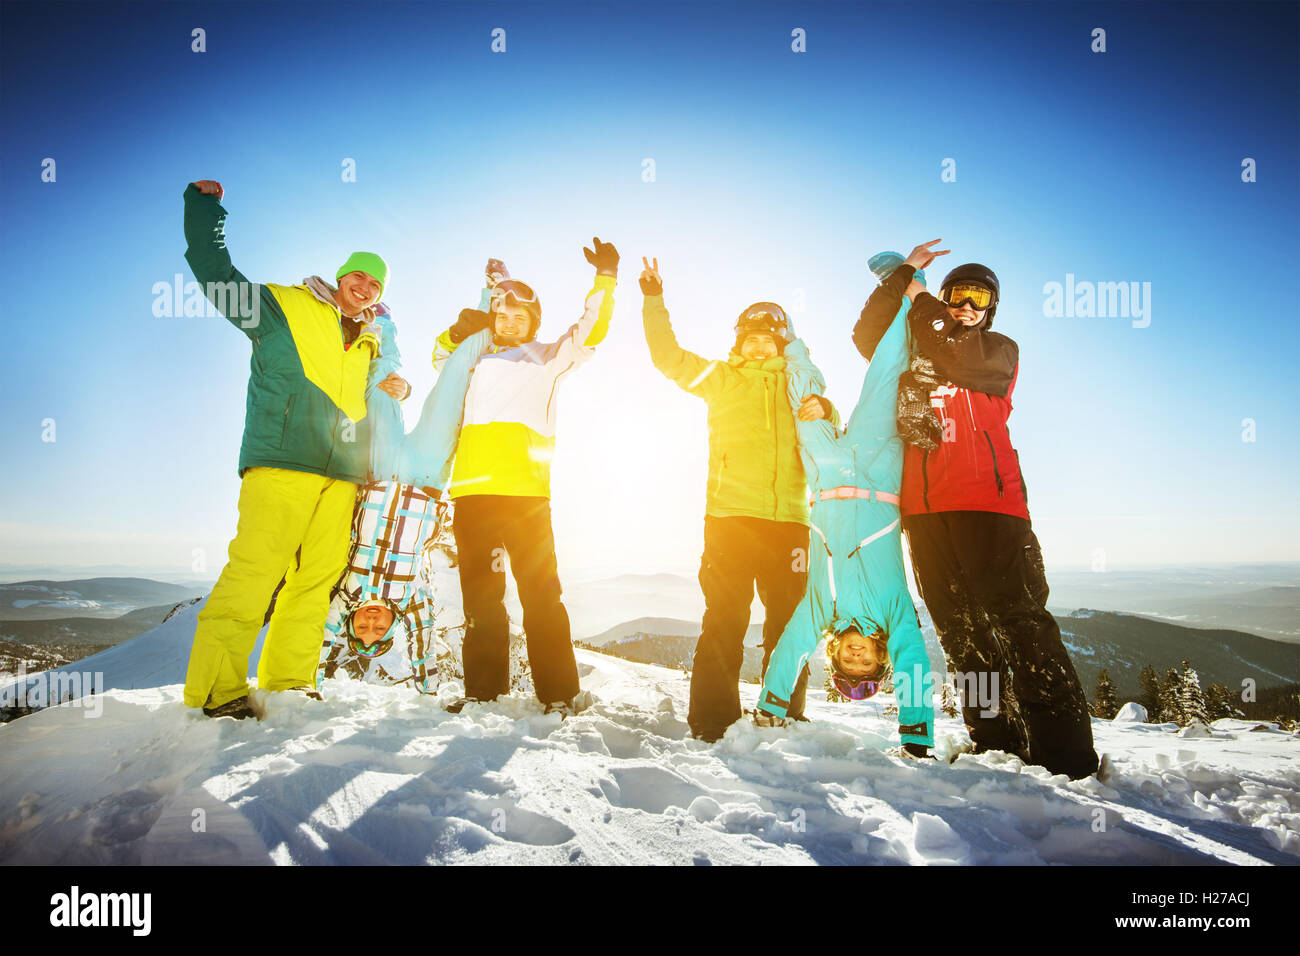 Snowboarders posing on blue sky backdrop in mountains skiing Stock Photo